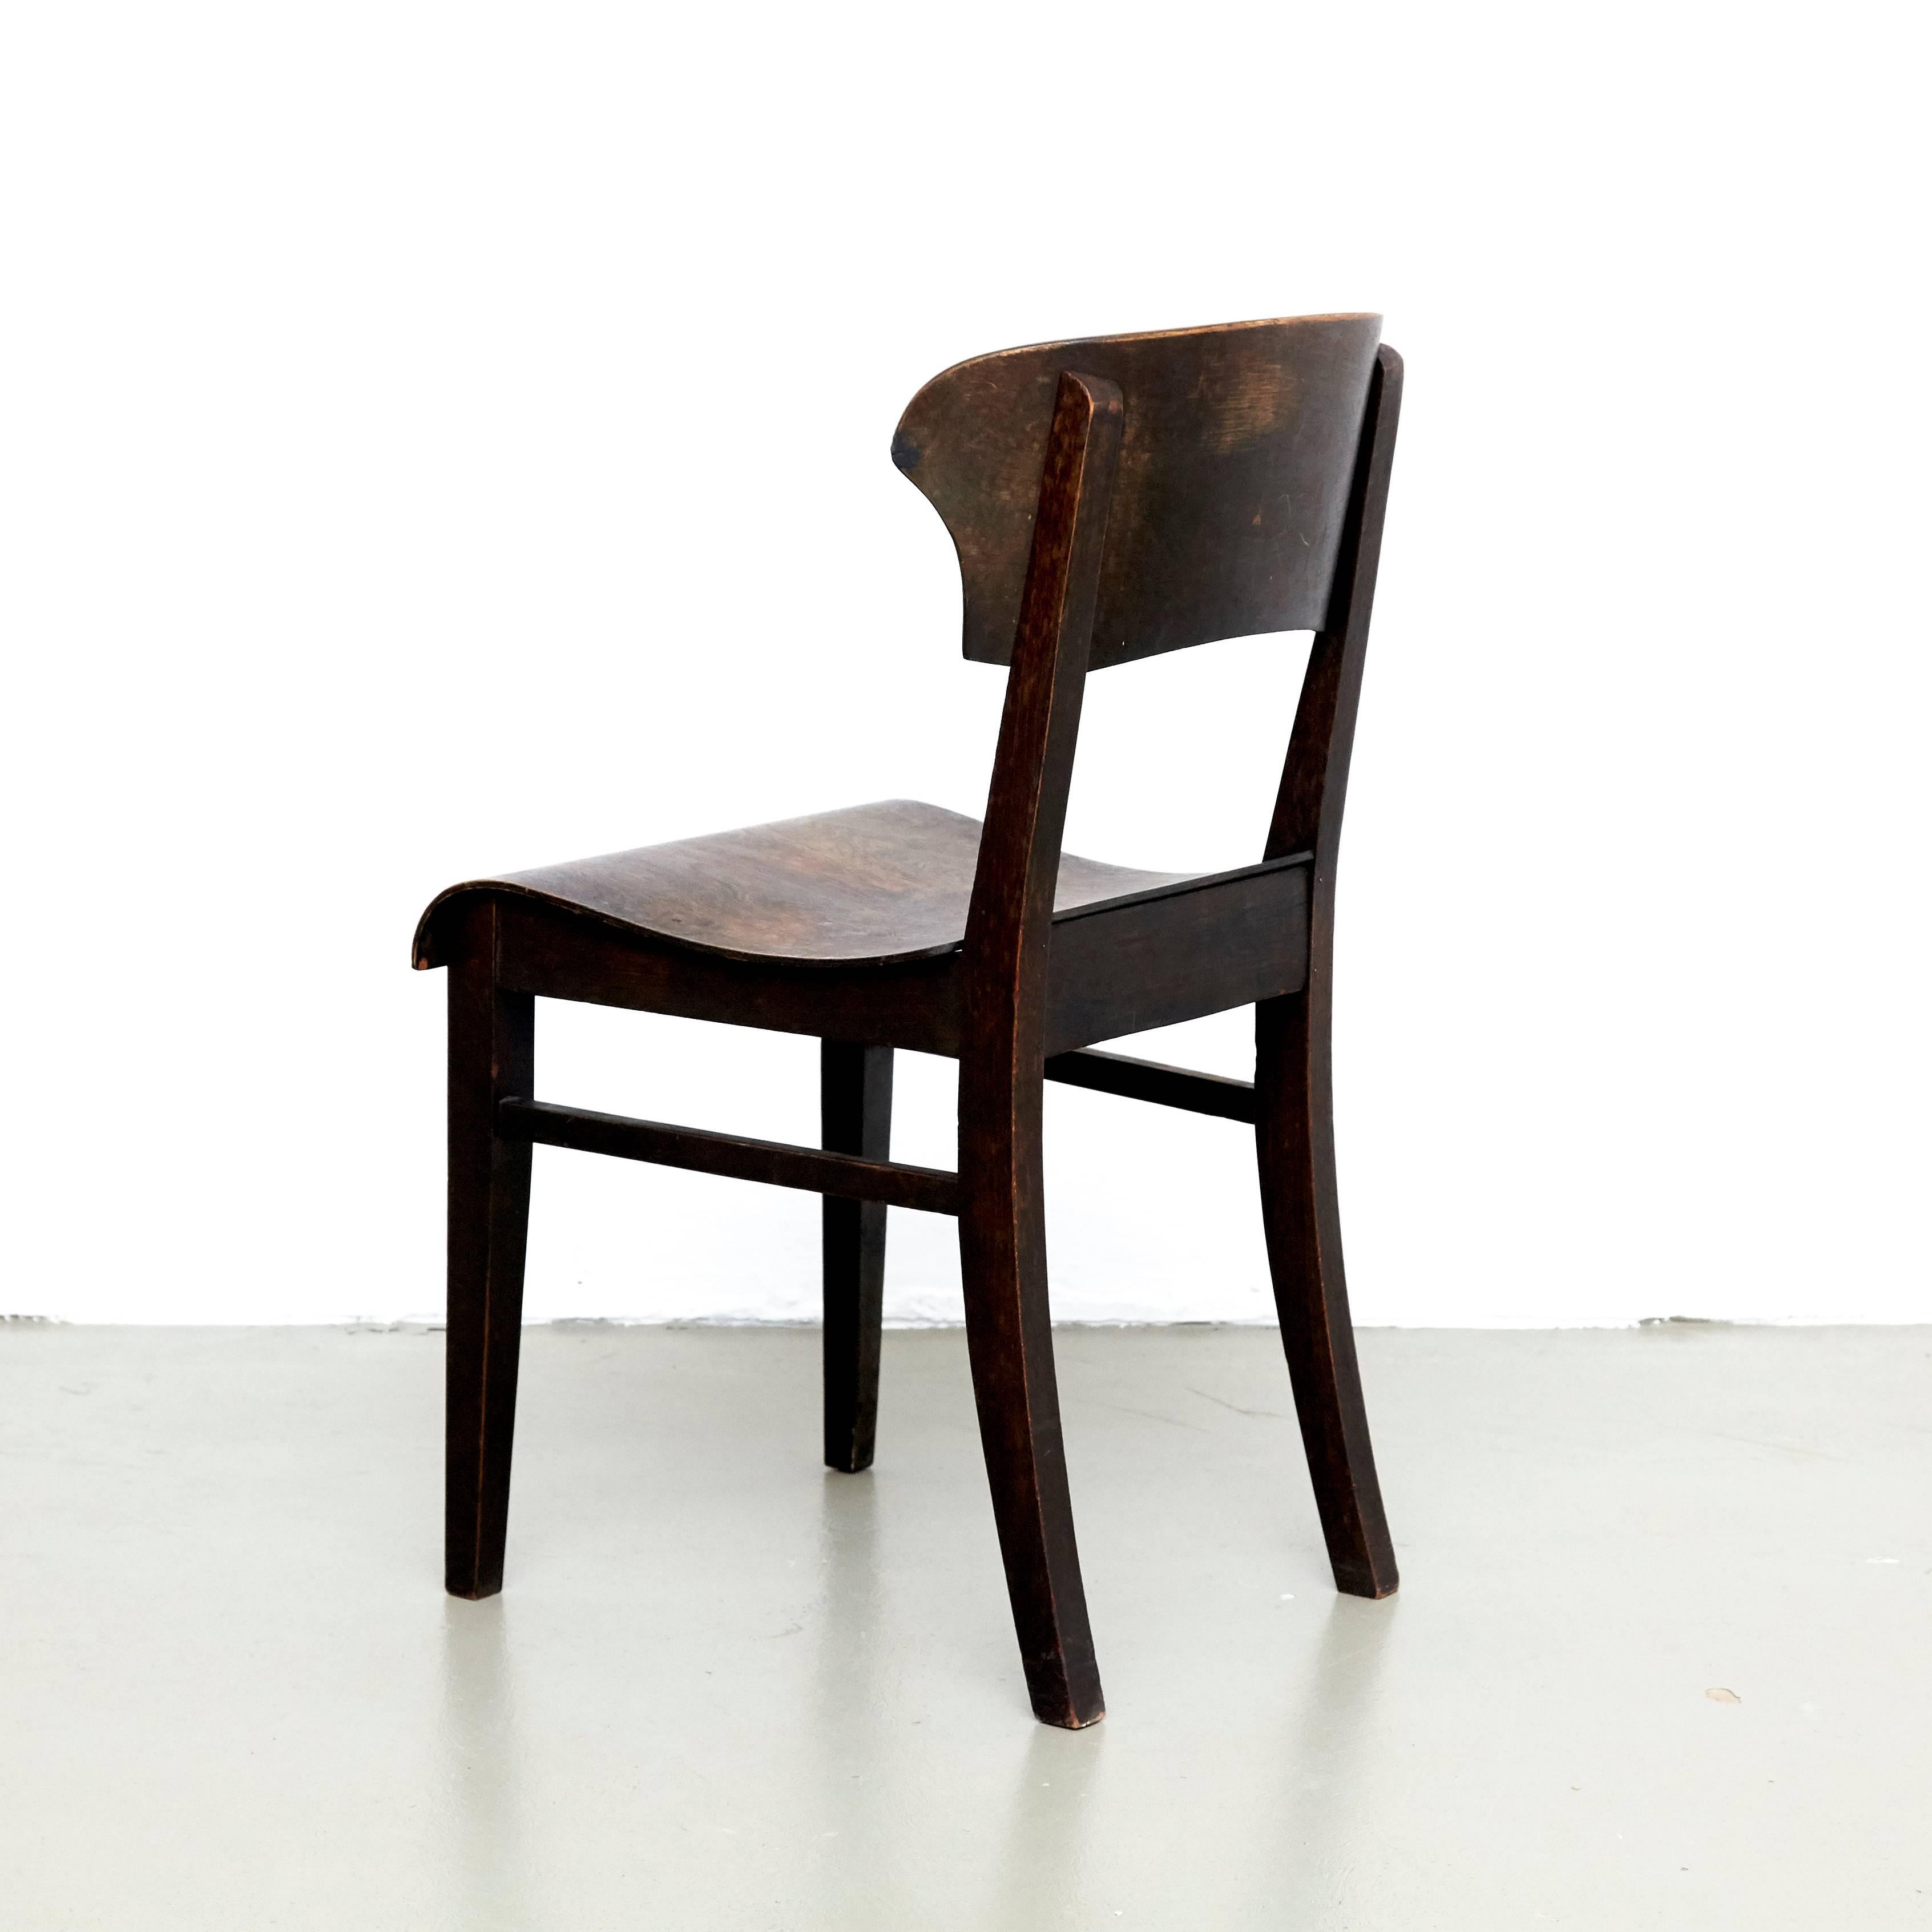 Early 20th Century Pair of Wooden Chairs in Style of Rockhausen, circa 1925